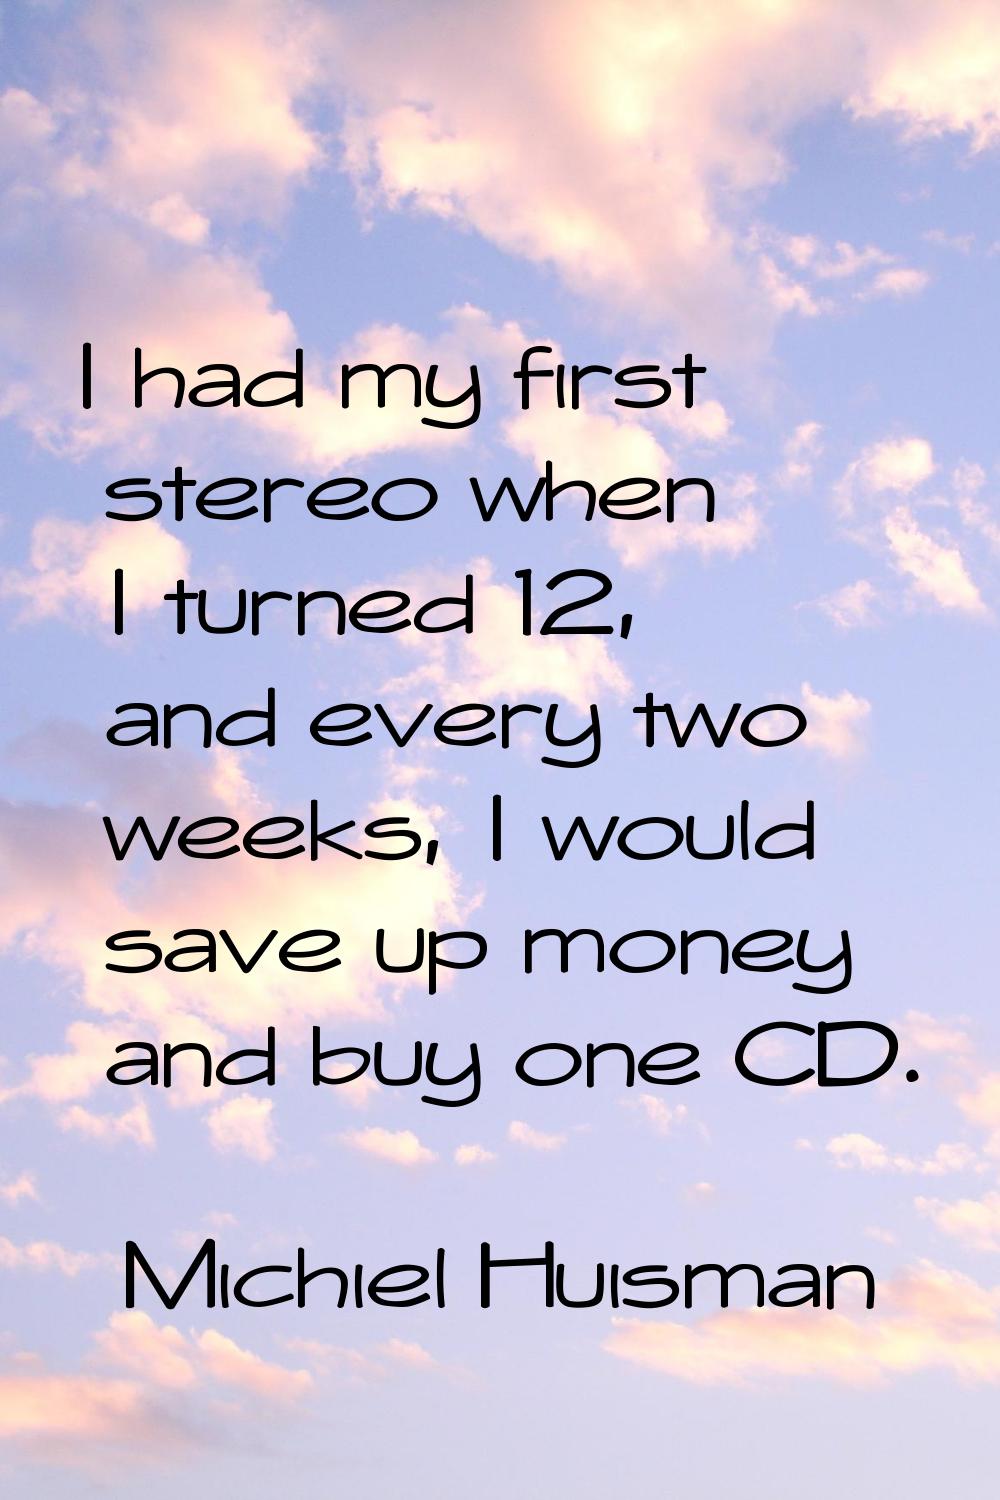 I had my first stereo when I turned 12, and every two weeks, I would save up money and buy one CD.